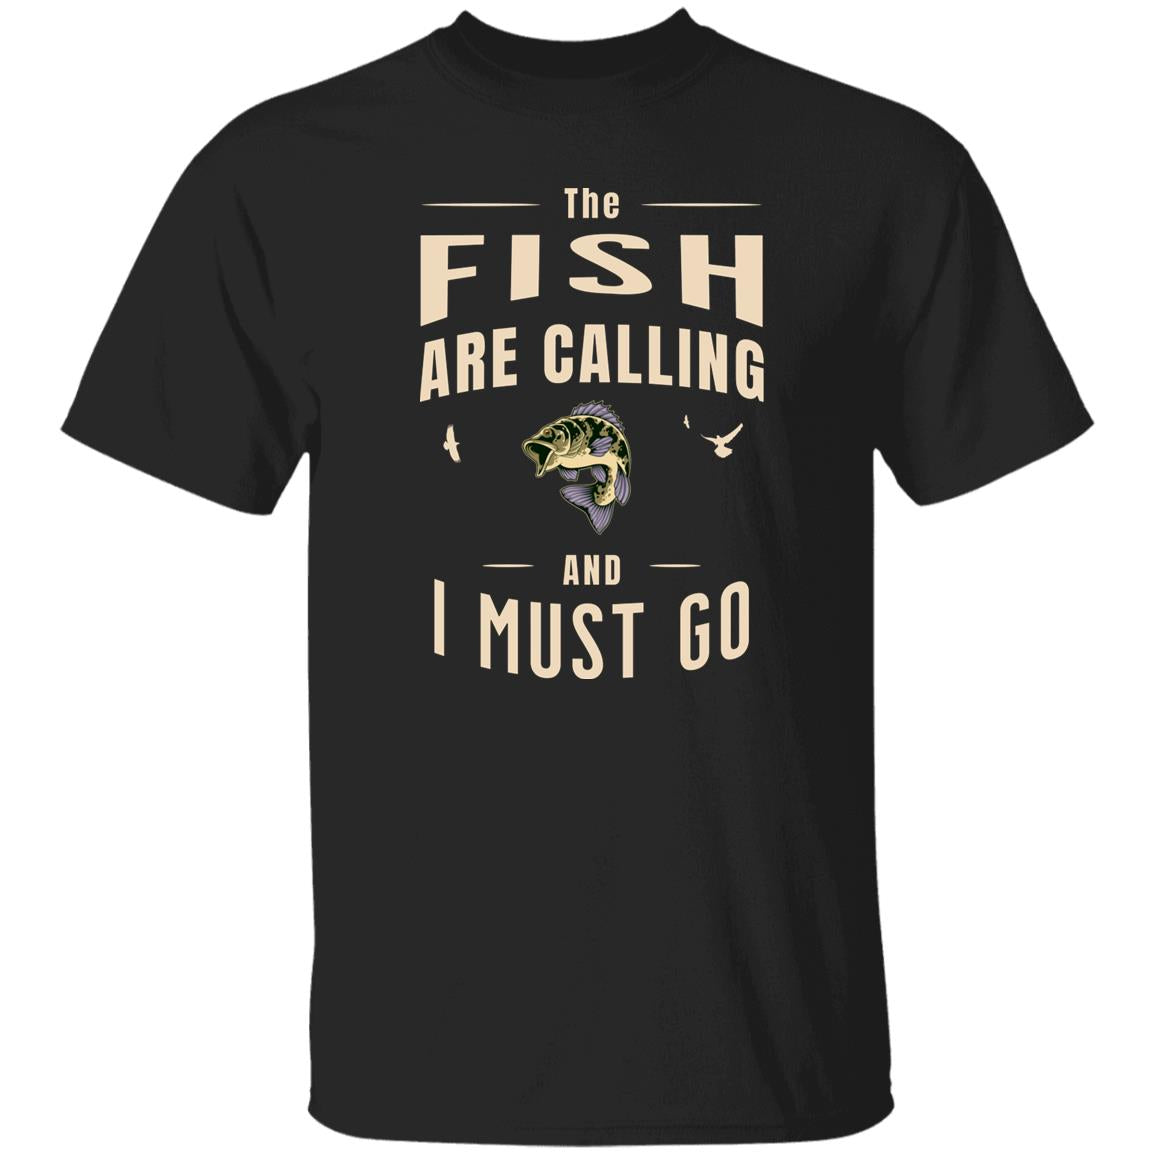 The fish are calling and i must go k t-shirt black